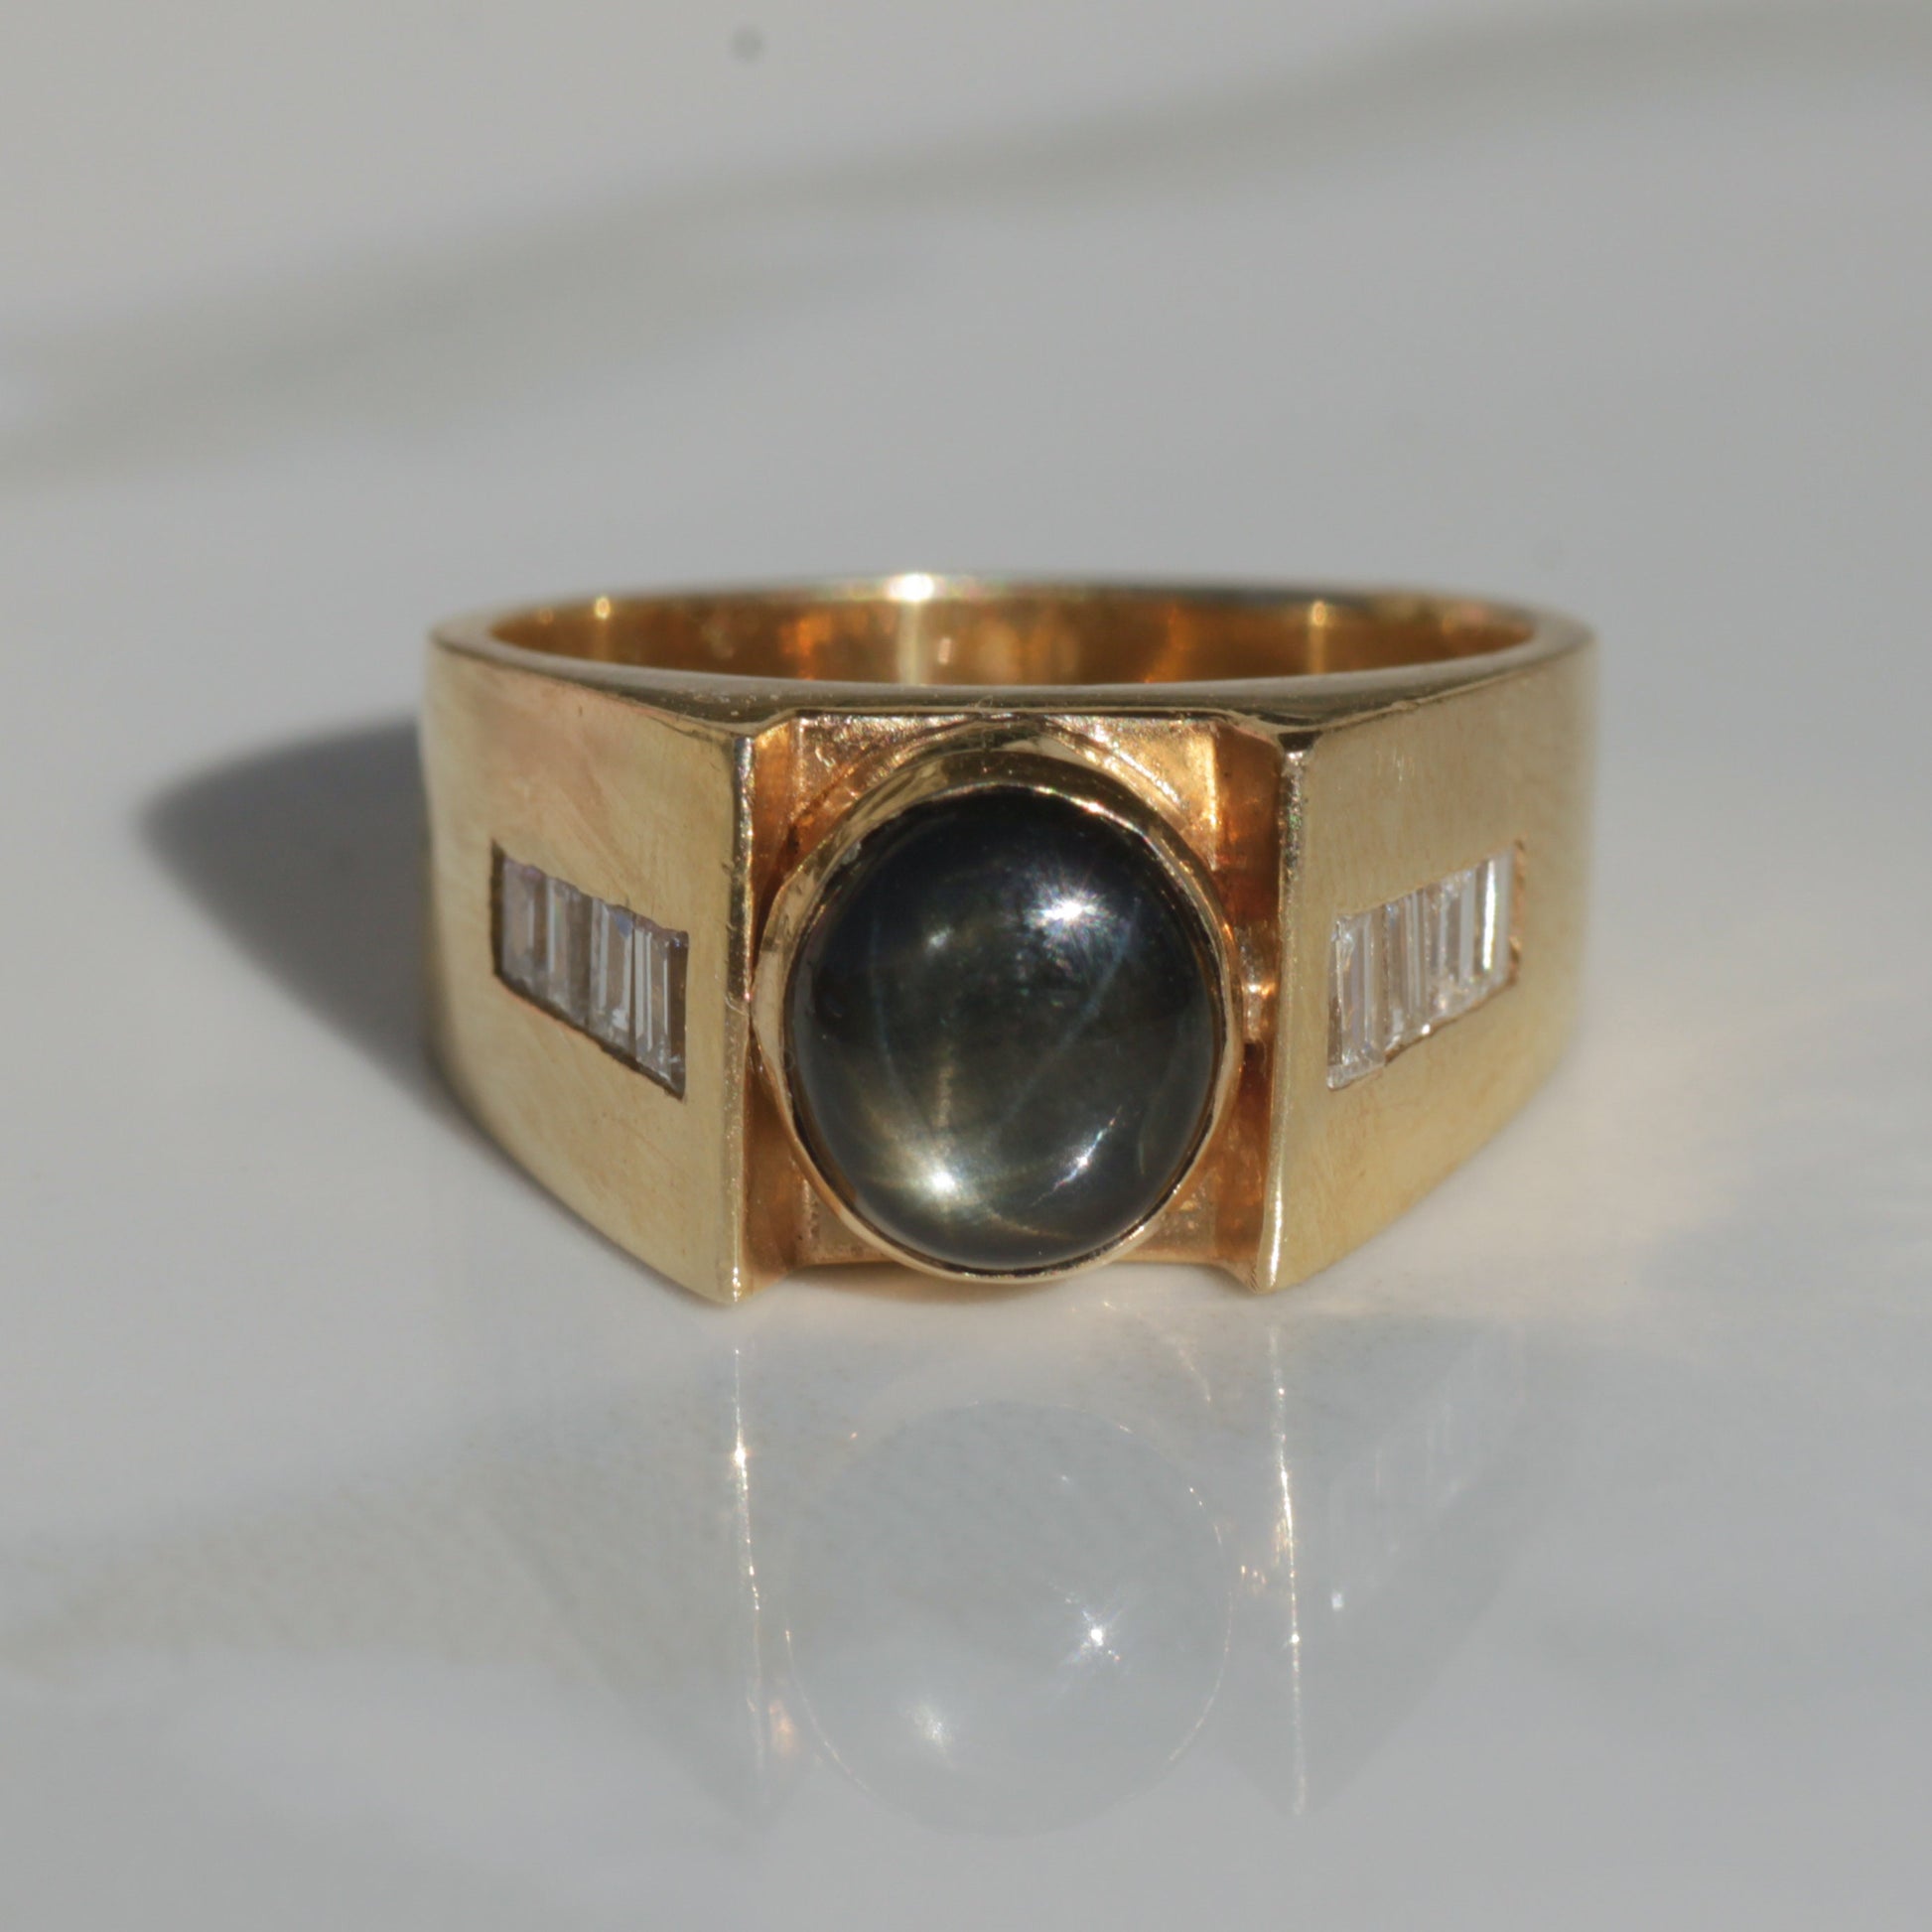 Vintage Black Double Star Sapphire and Diamond Ring 14k Gold Sz 6.75